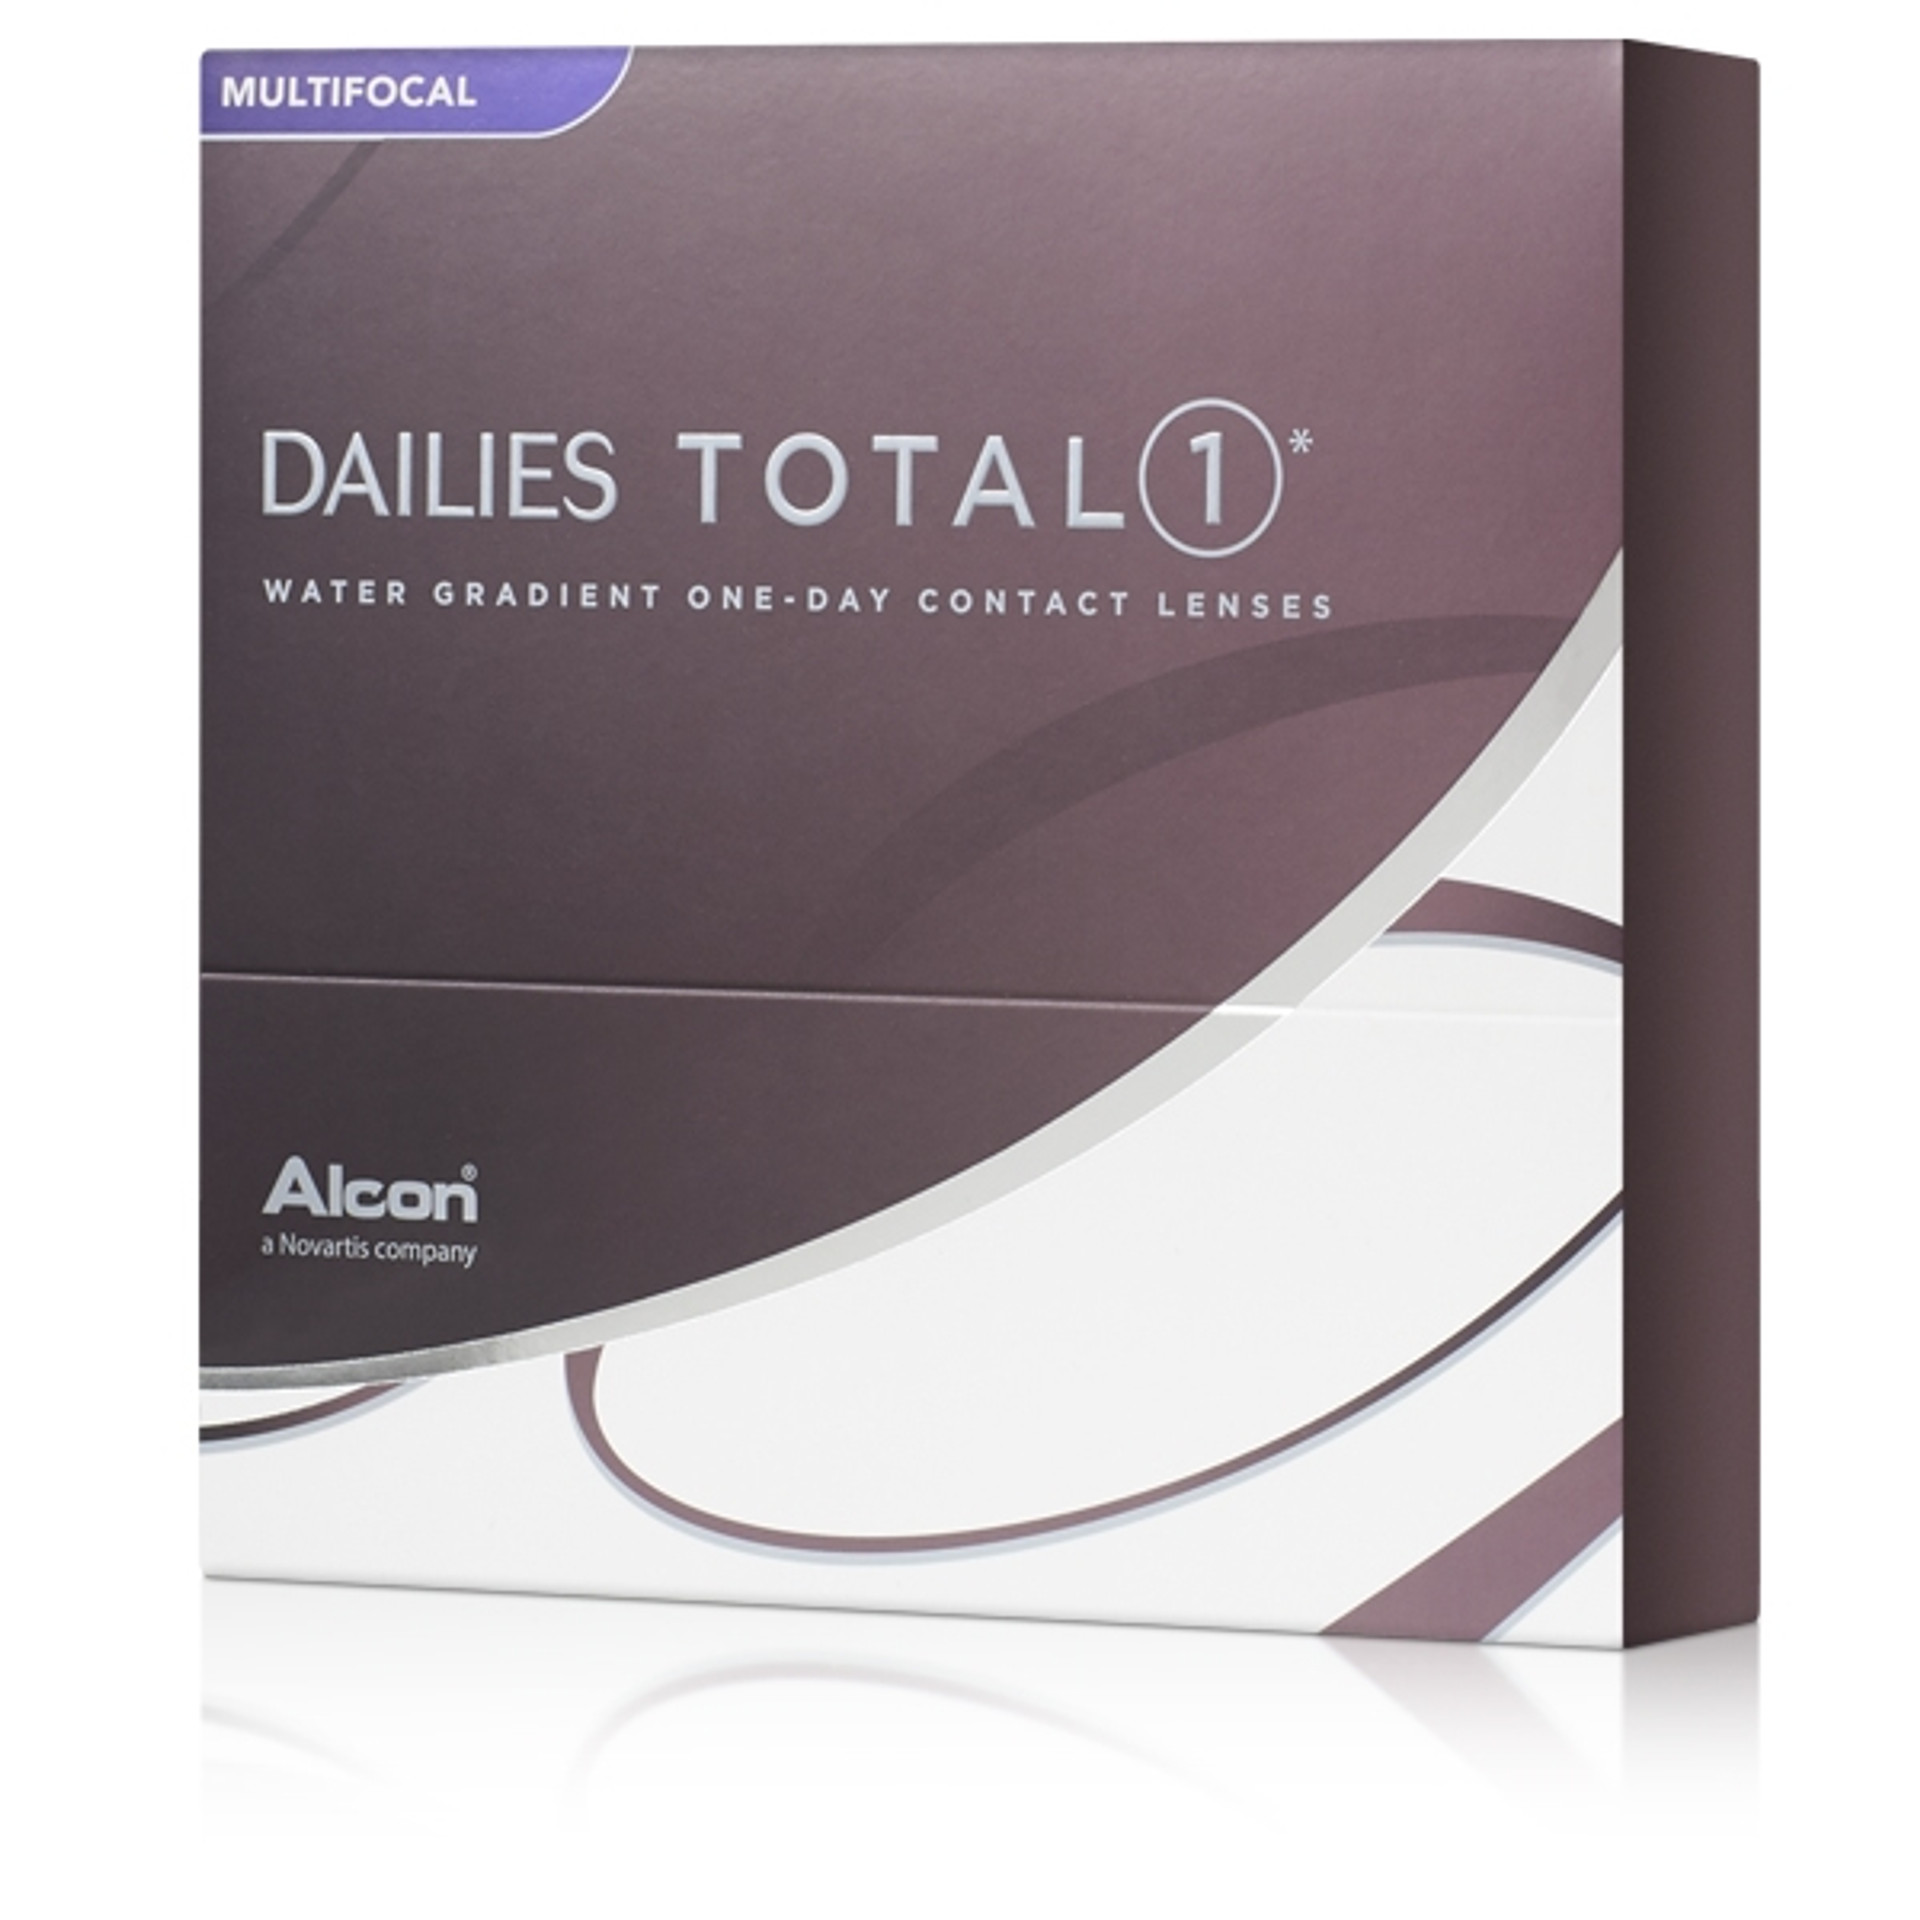 dailies-total-1-multifocal-90-pack-contact-lenses-fsa-store-optical